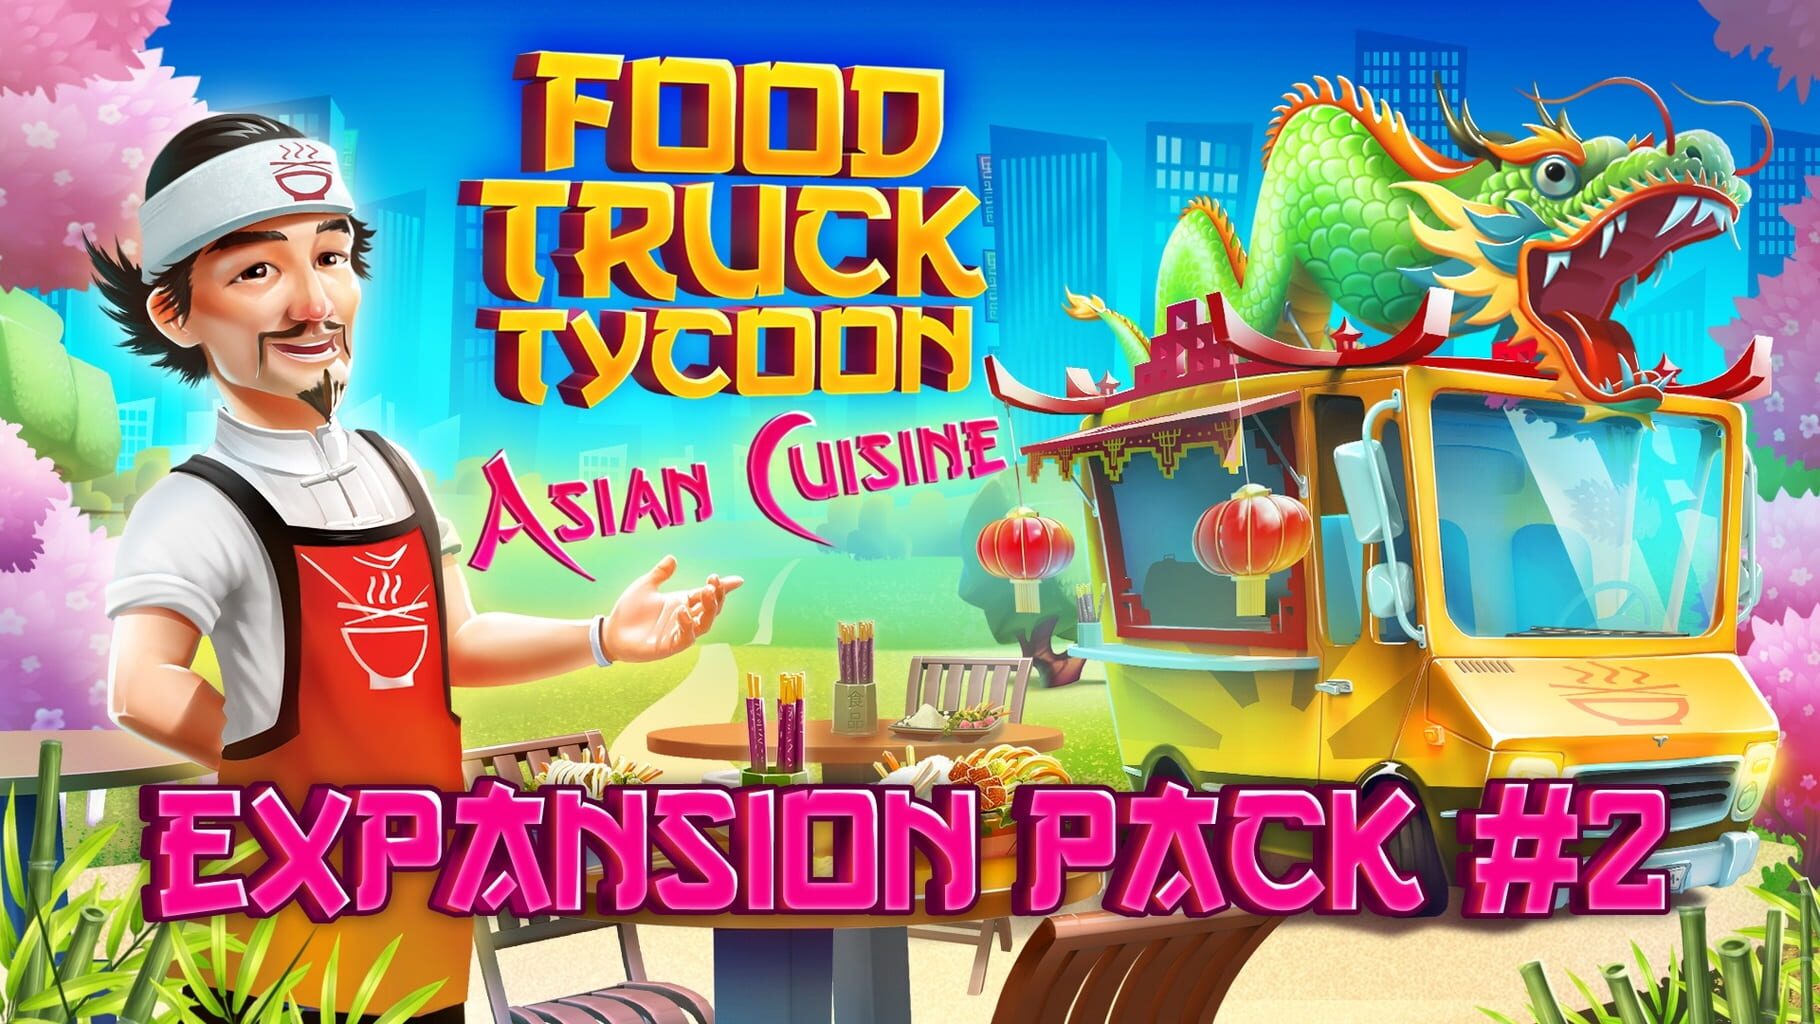 Food Truck Tycoon: Asian Cuisine Expansion Pack 2 artwork